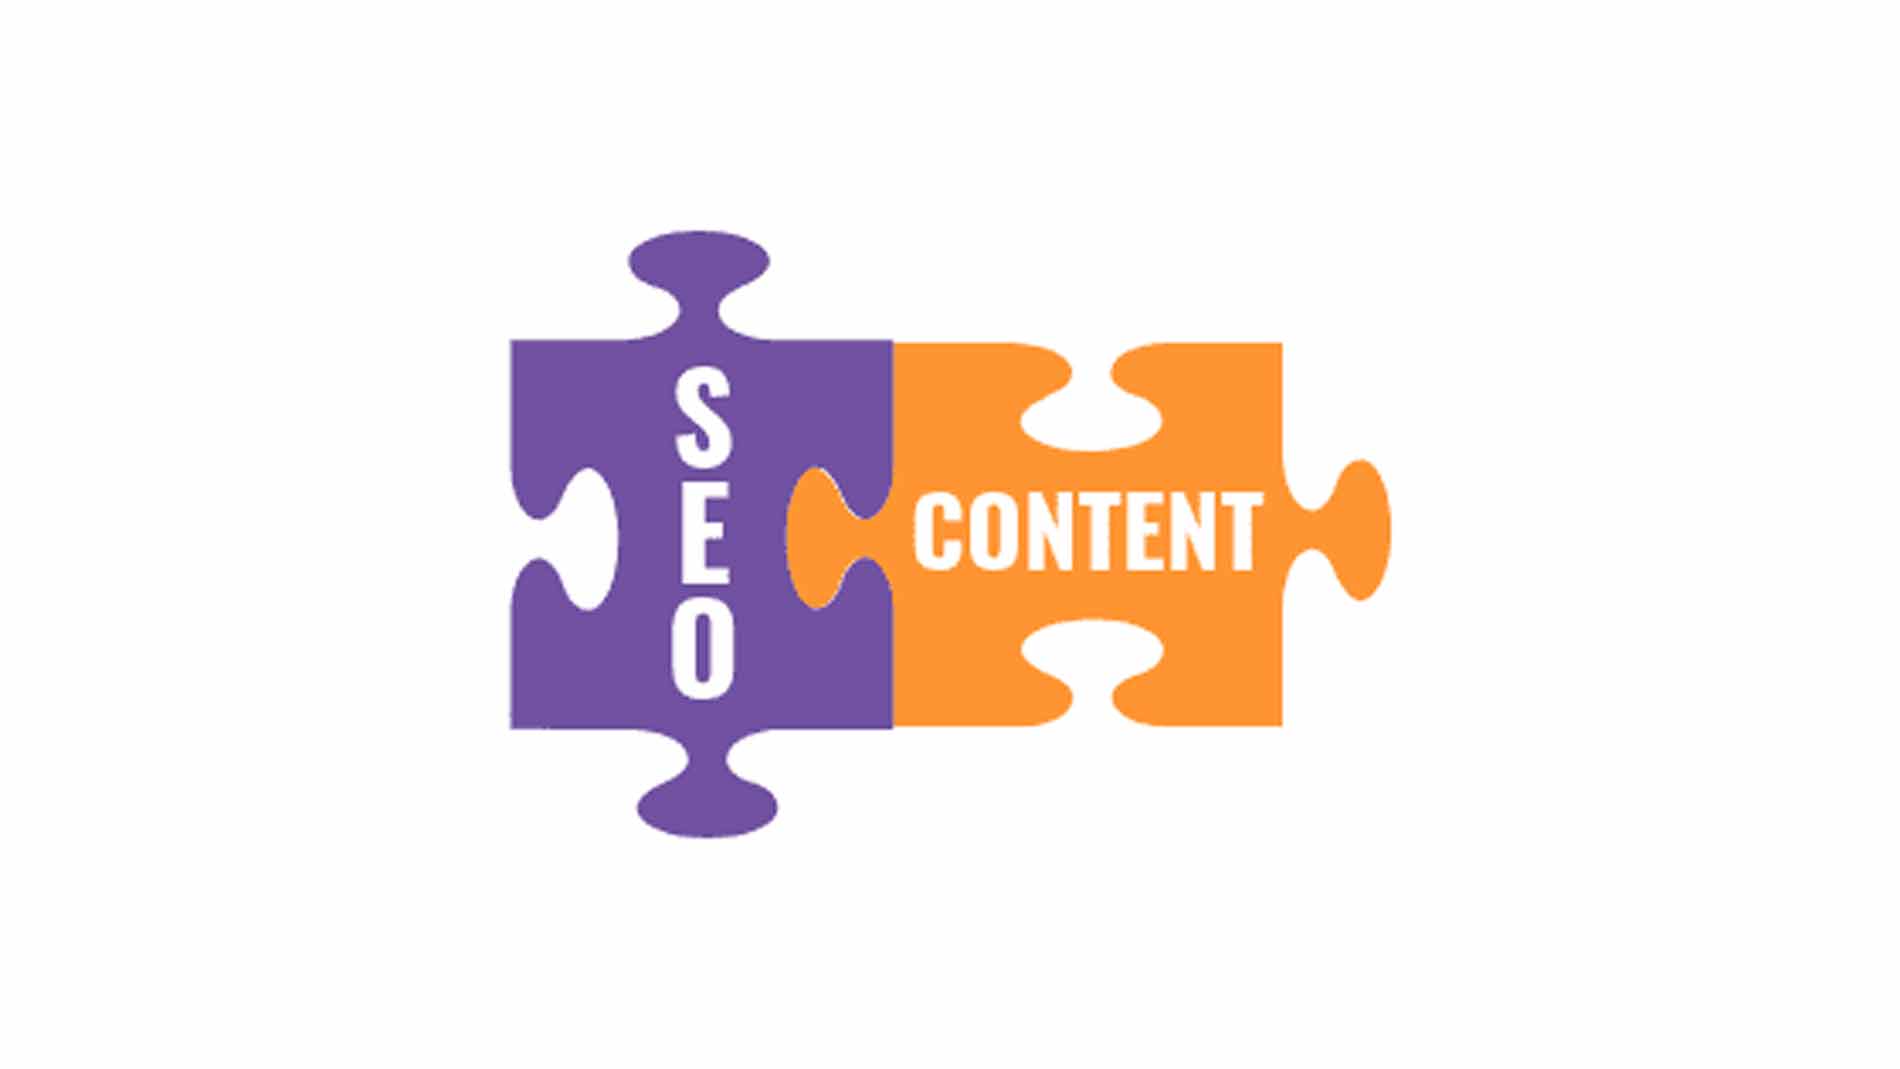 seo and content fitting together